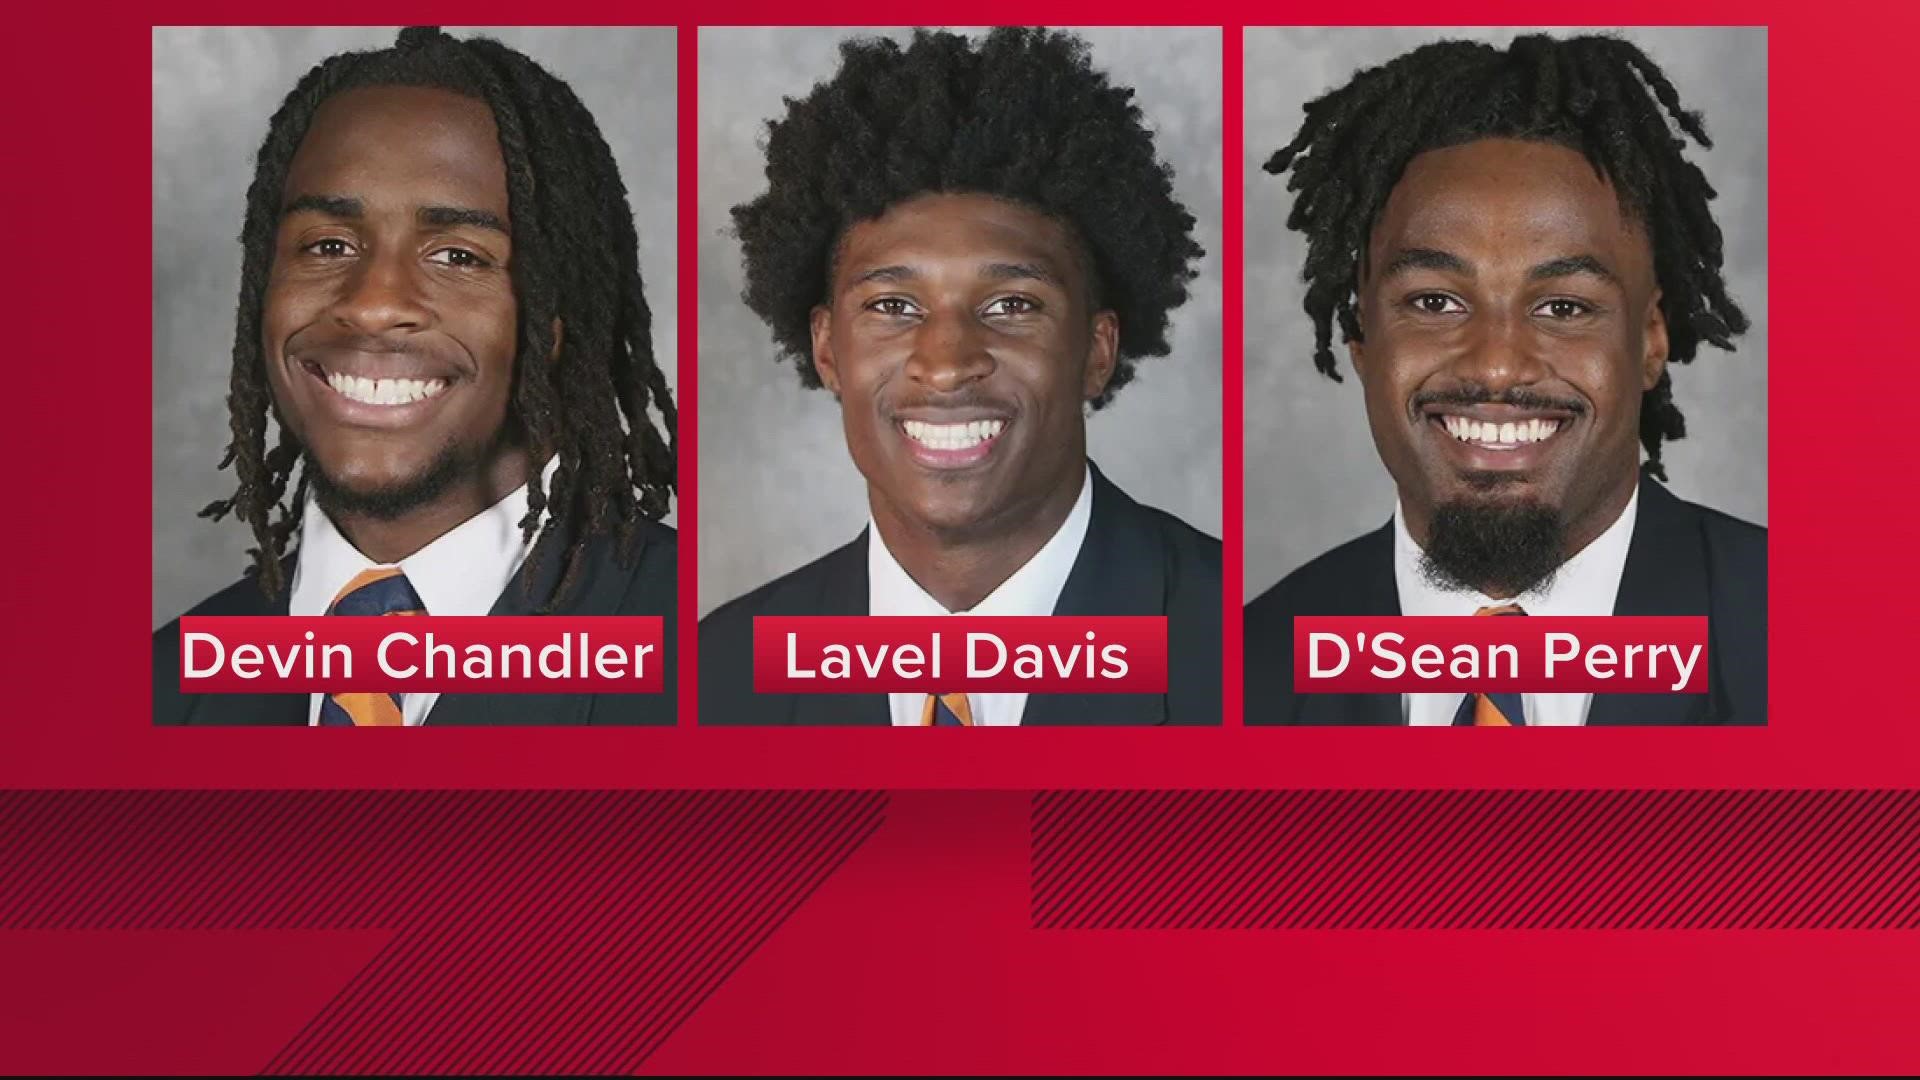 The University of Virginia announced on Tuesday that posthumous degrees will be awarded to Lavel Davis Jr., Devin Chandler, and D'Sean Perry.